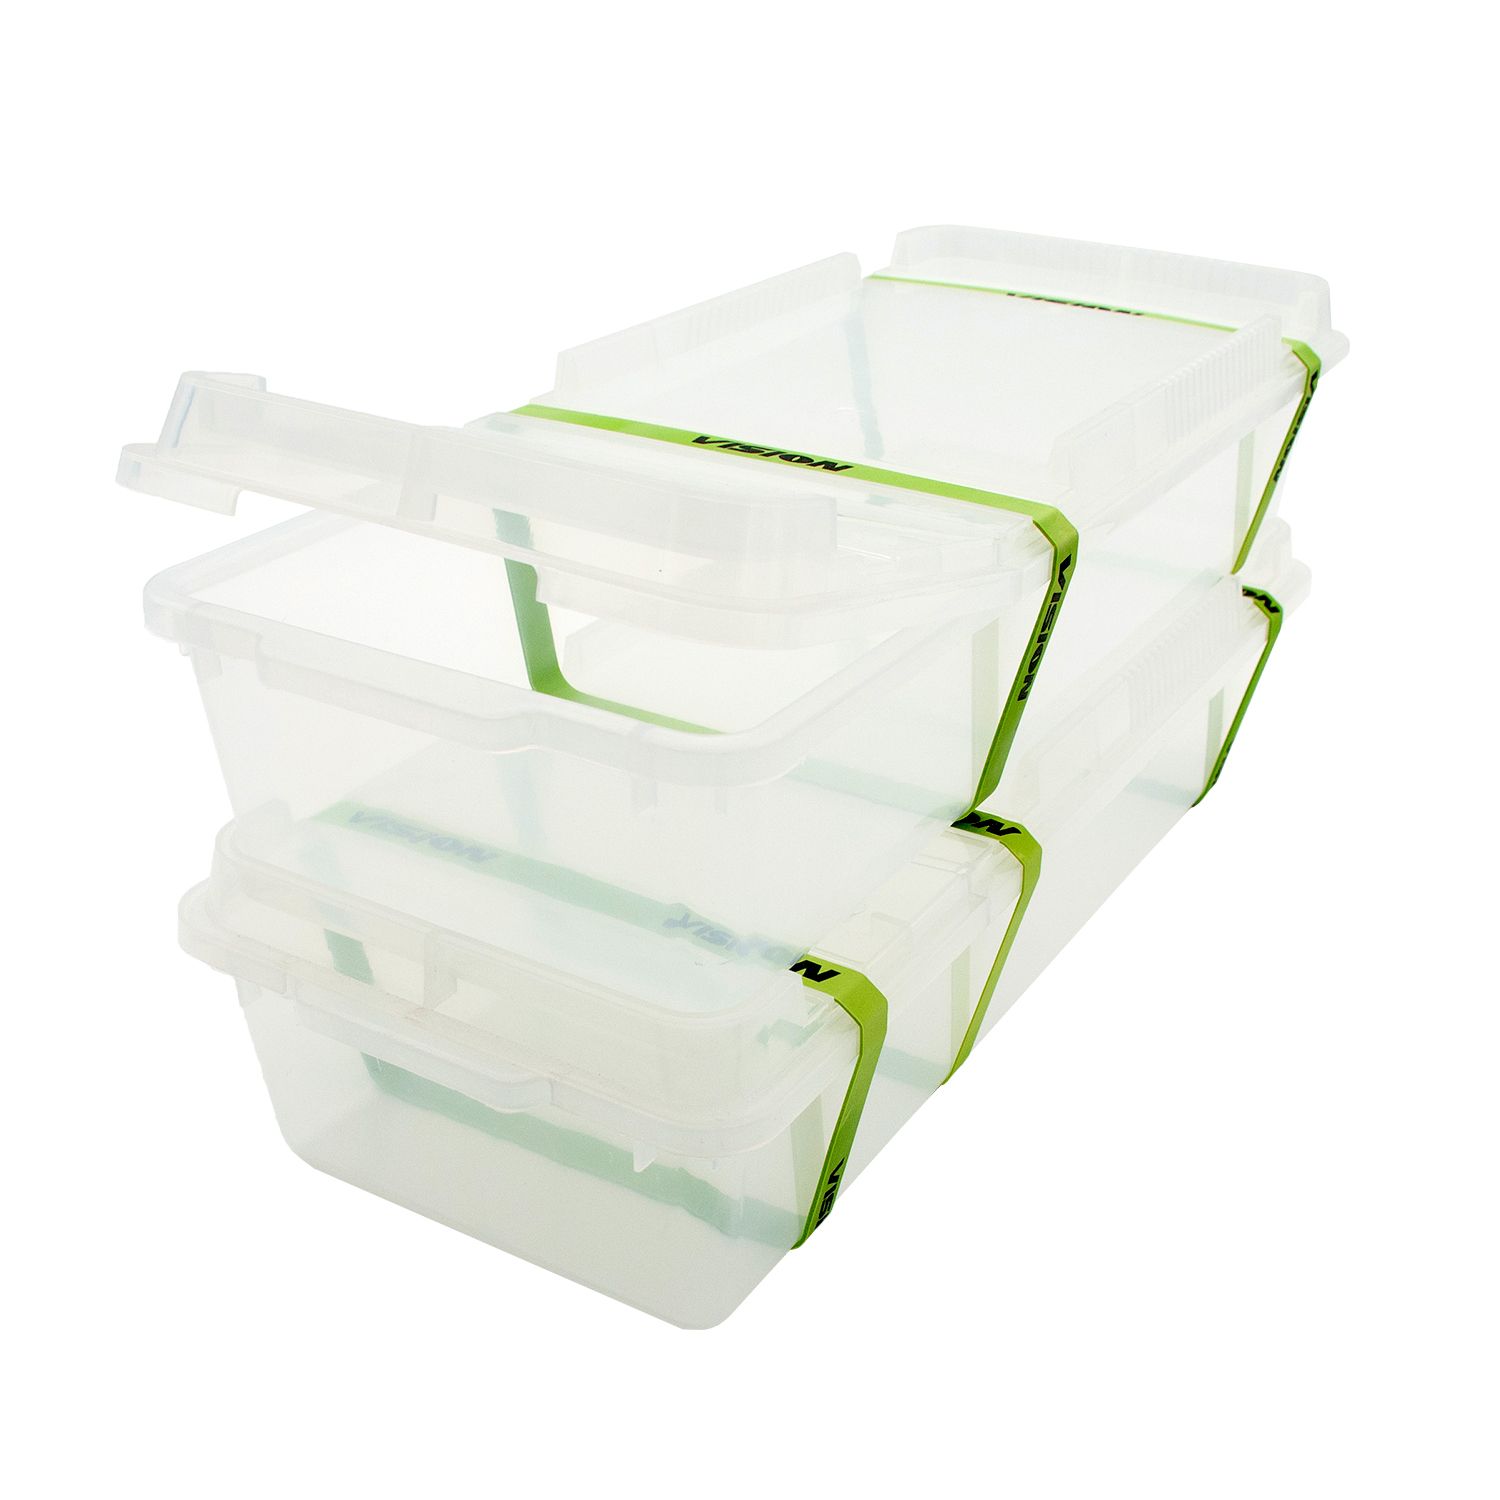 V-28 Tub - Rubbermaid 2221 Replacement - Vision Products